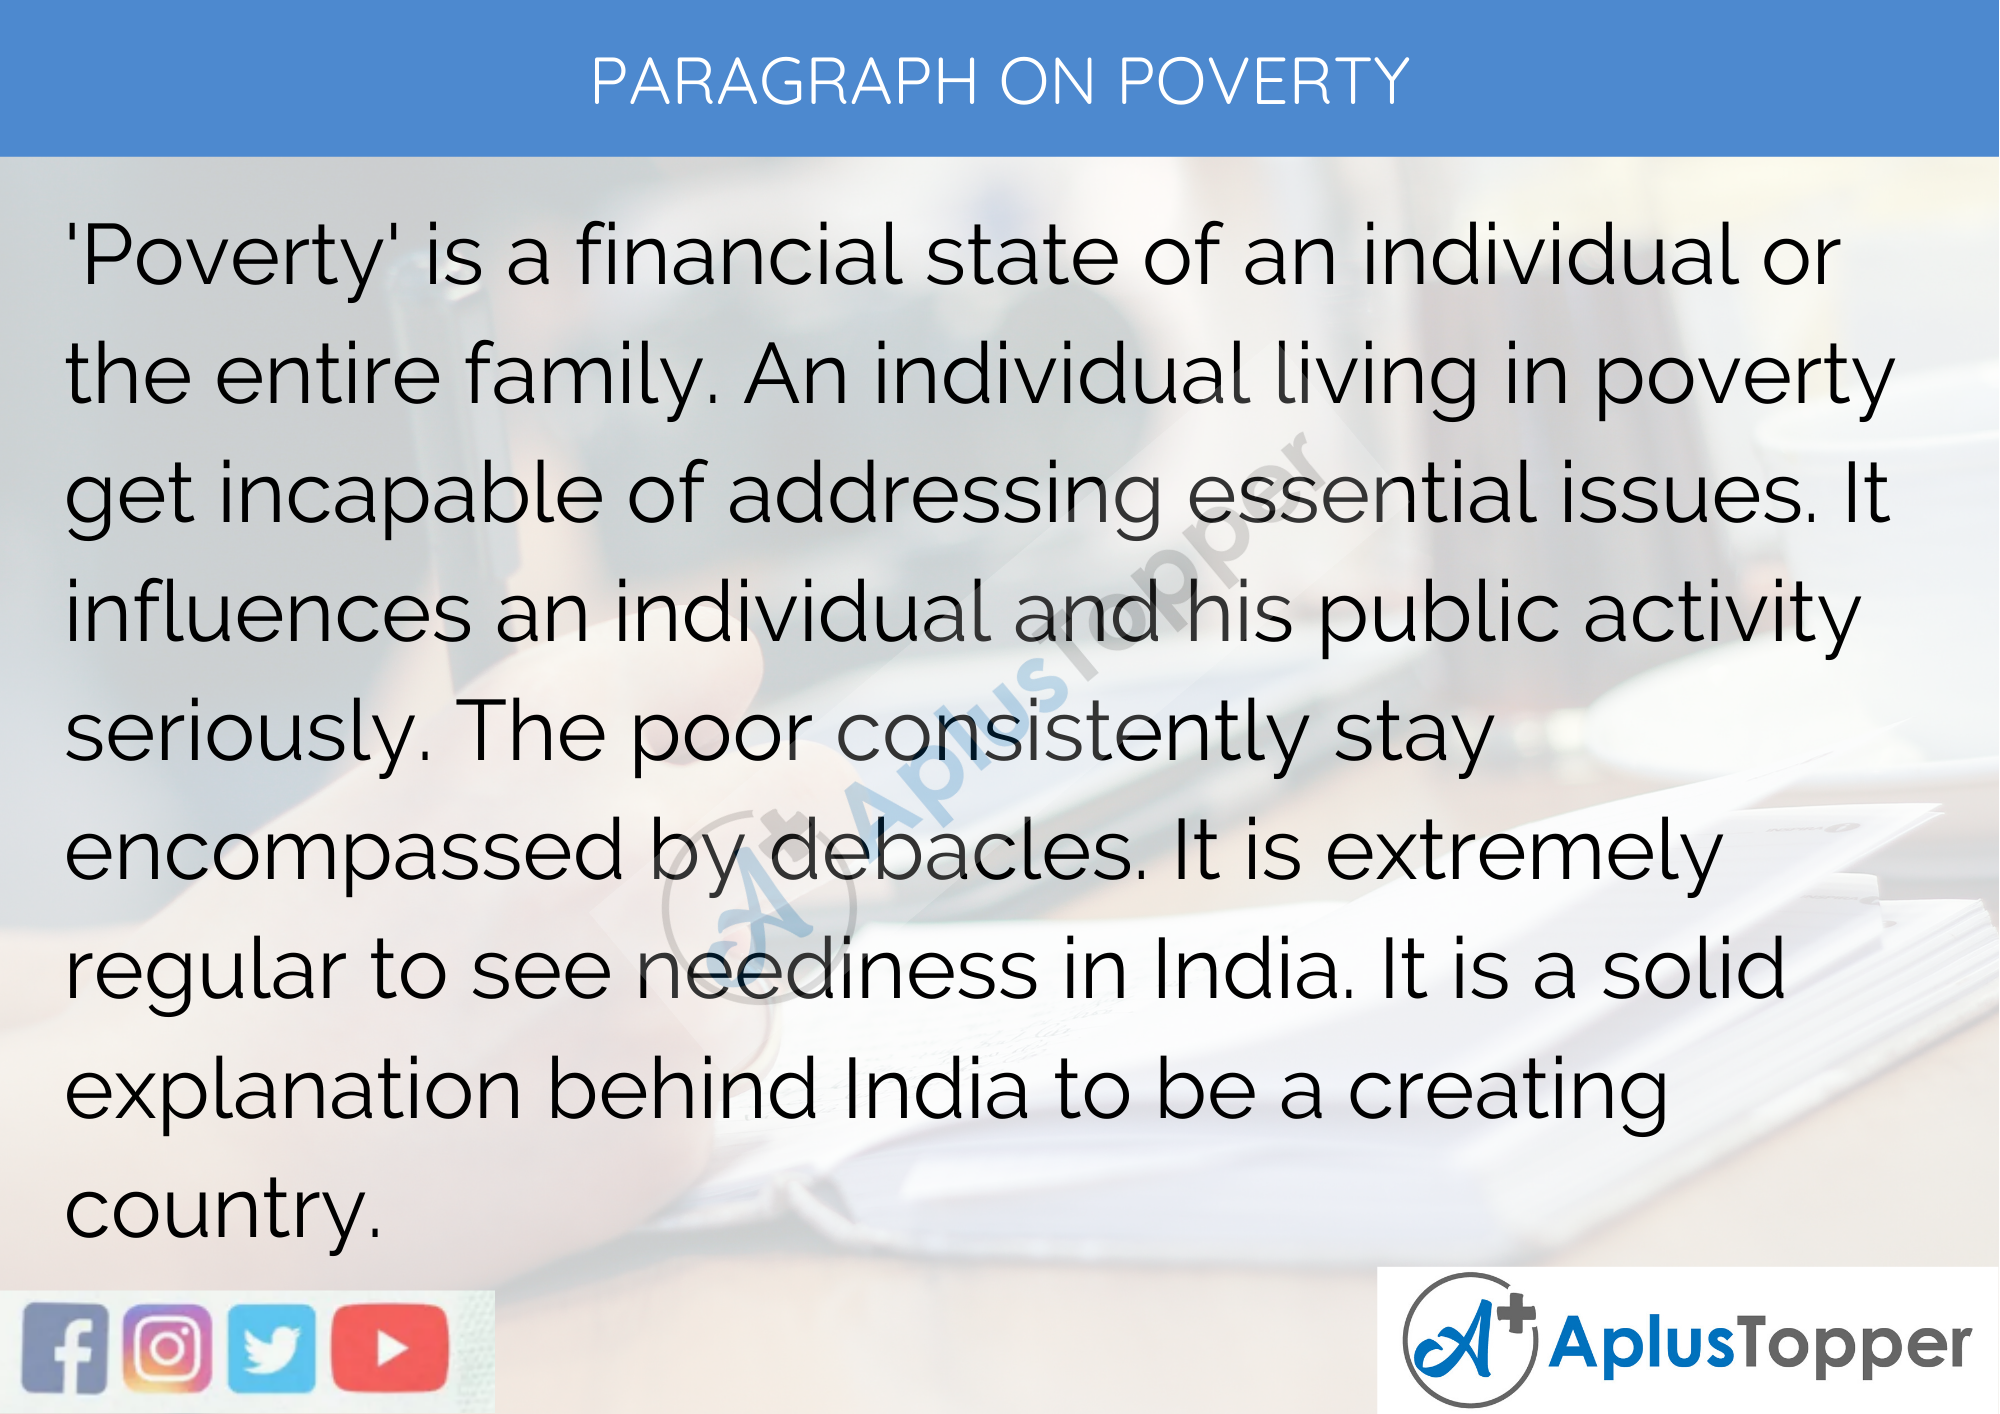 Paragraph On Poverty - 100 Words for Classes 1, 2, 3 Kids